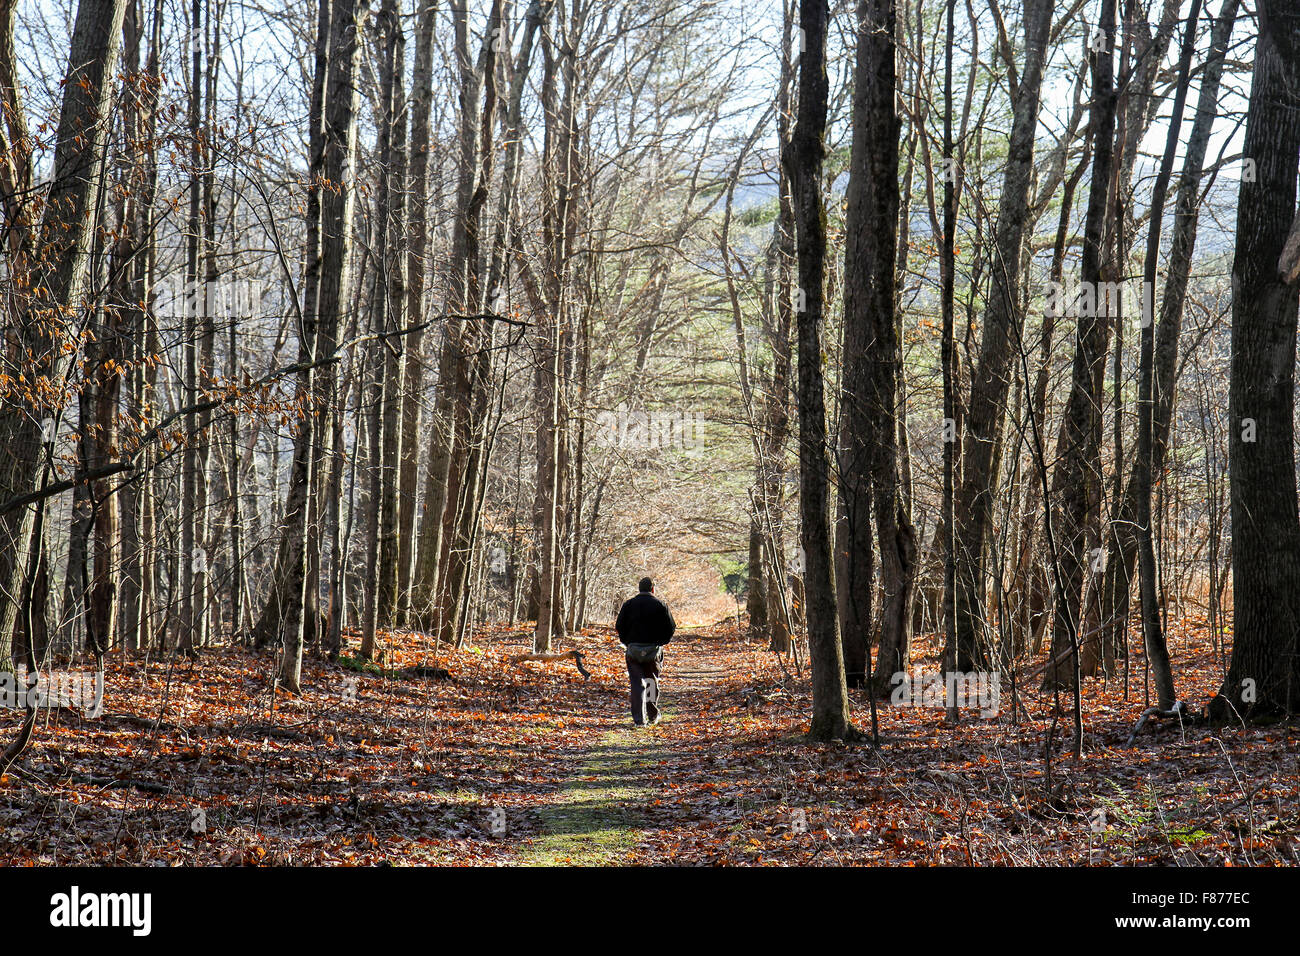 A man walks down a path within the Mohawk Trail State Forest Stock Photo